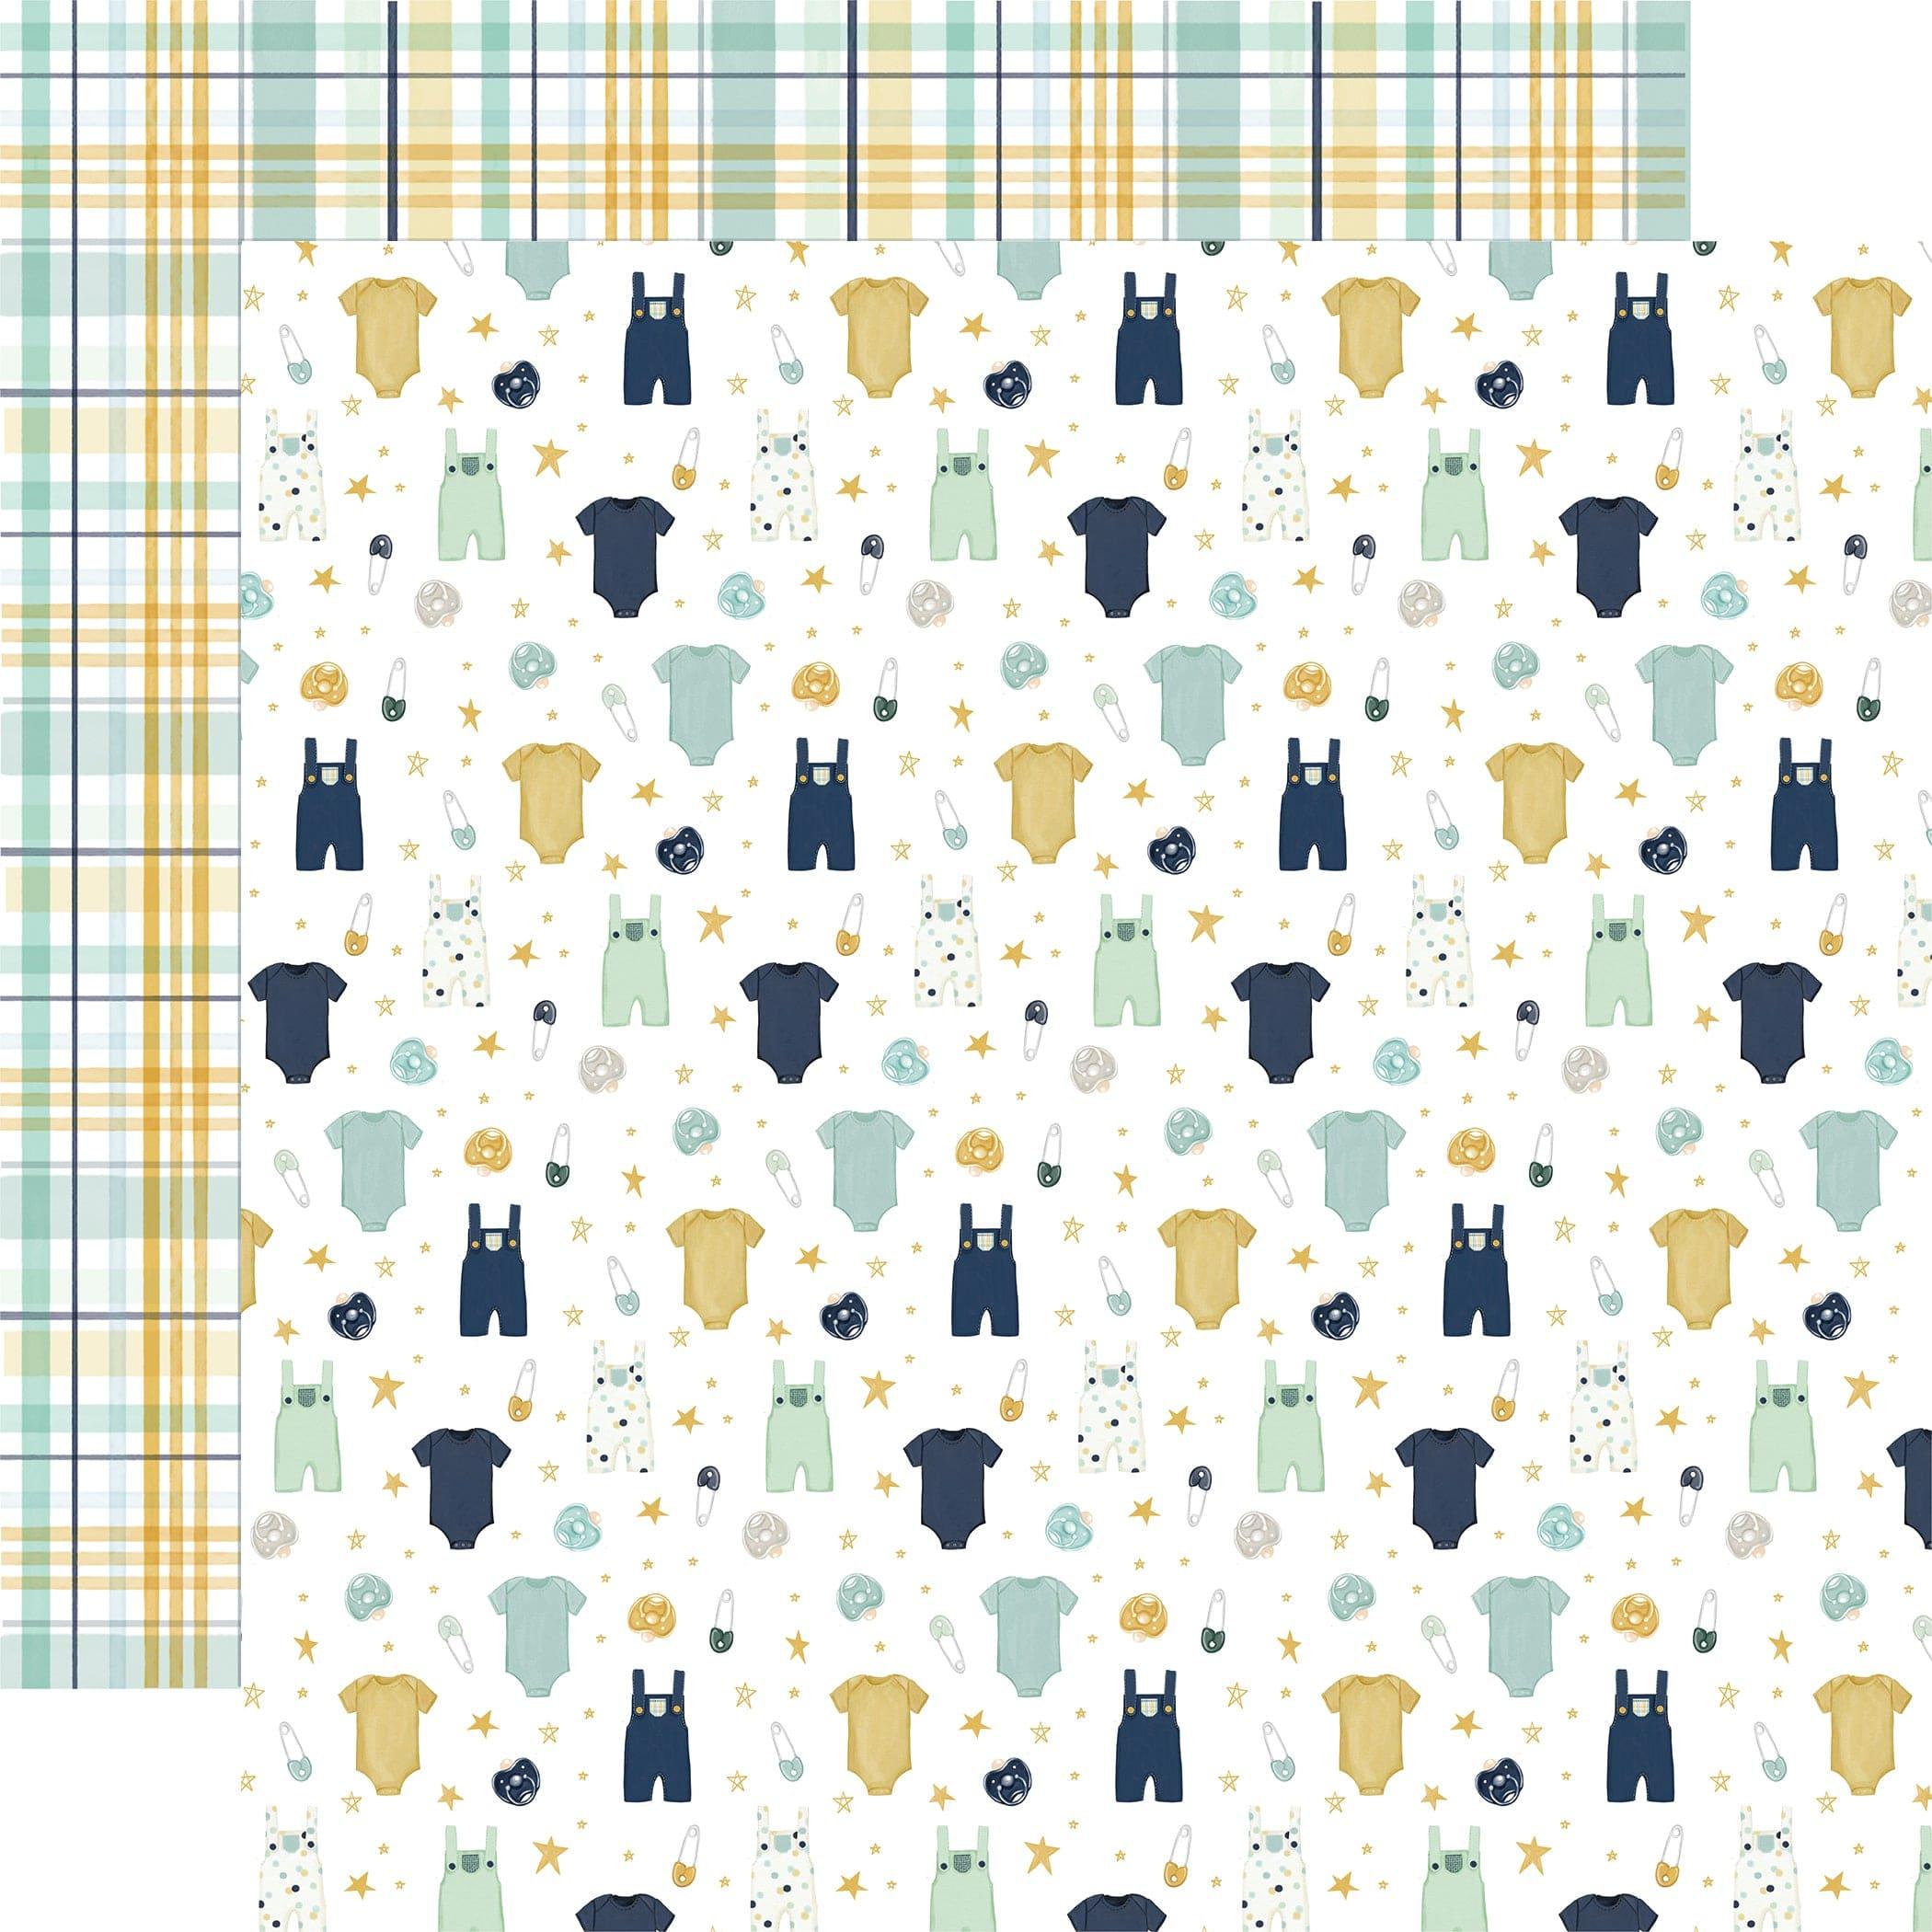 It's A Boy Collection Outfits and Overalls 12 x 12 Double-Sided Scrapbook Paper by Echo Park Paper - Scrapbook Supply Companies